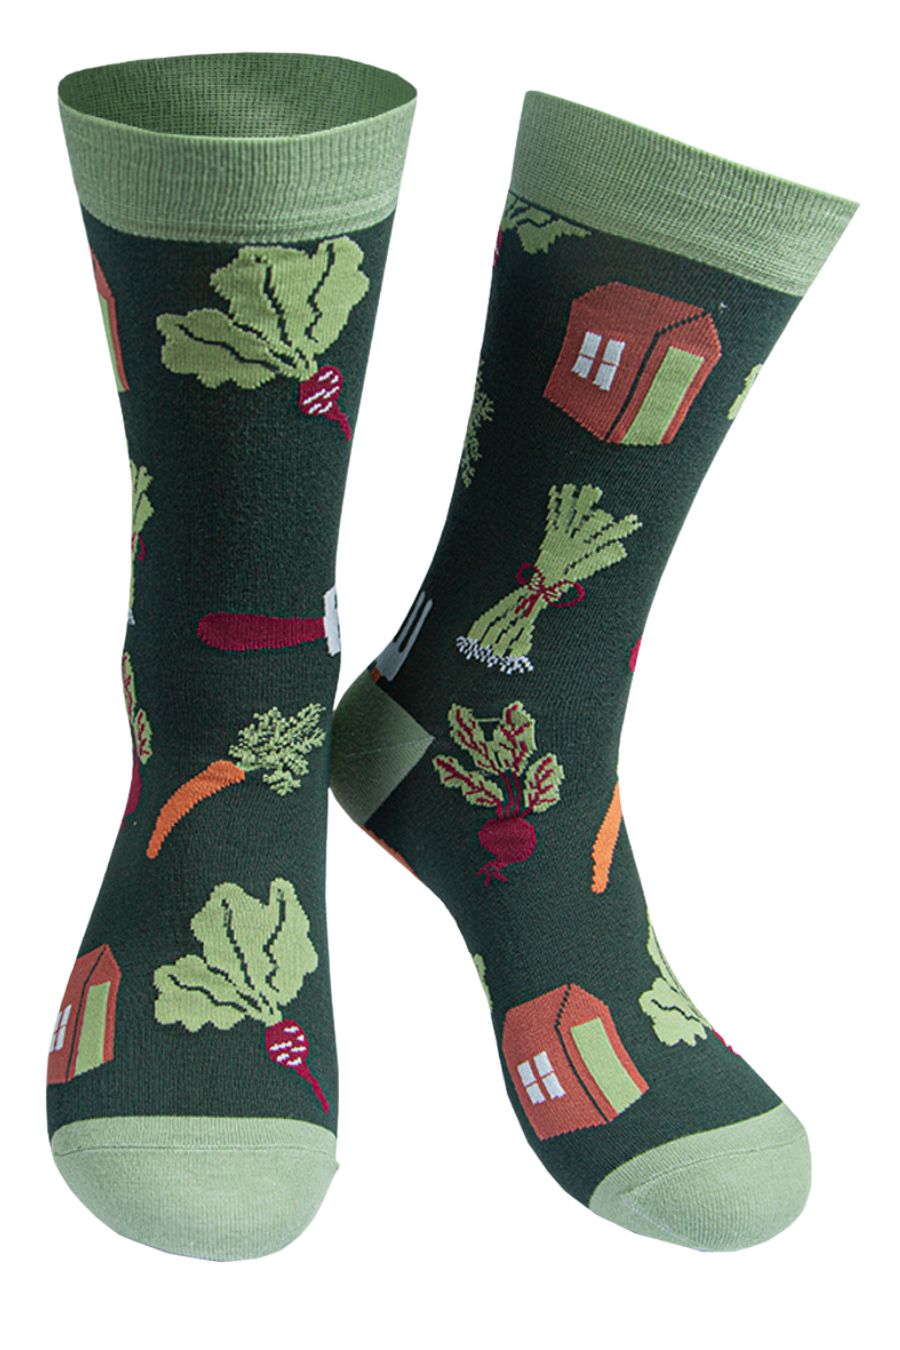 green dress socks with garden sheds, carrots, leeks and gardening tools